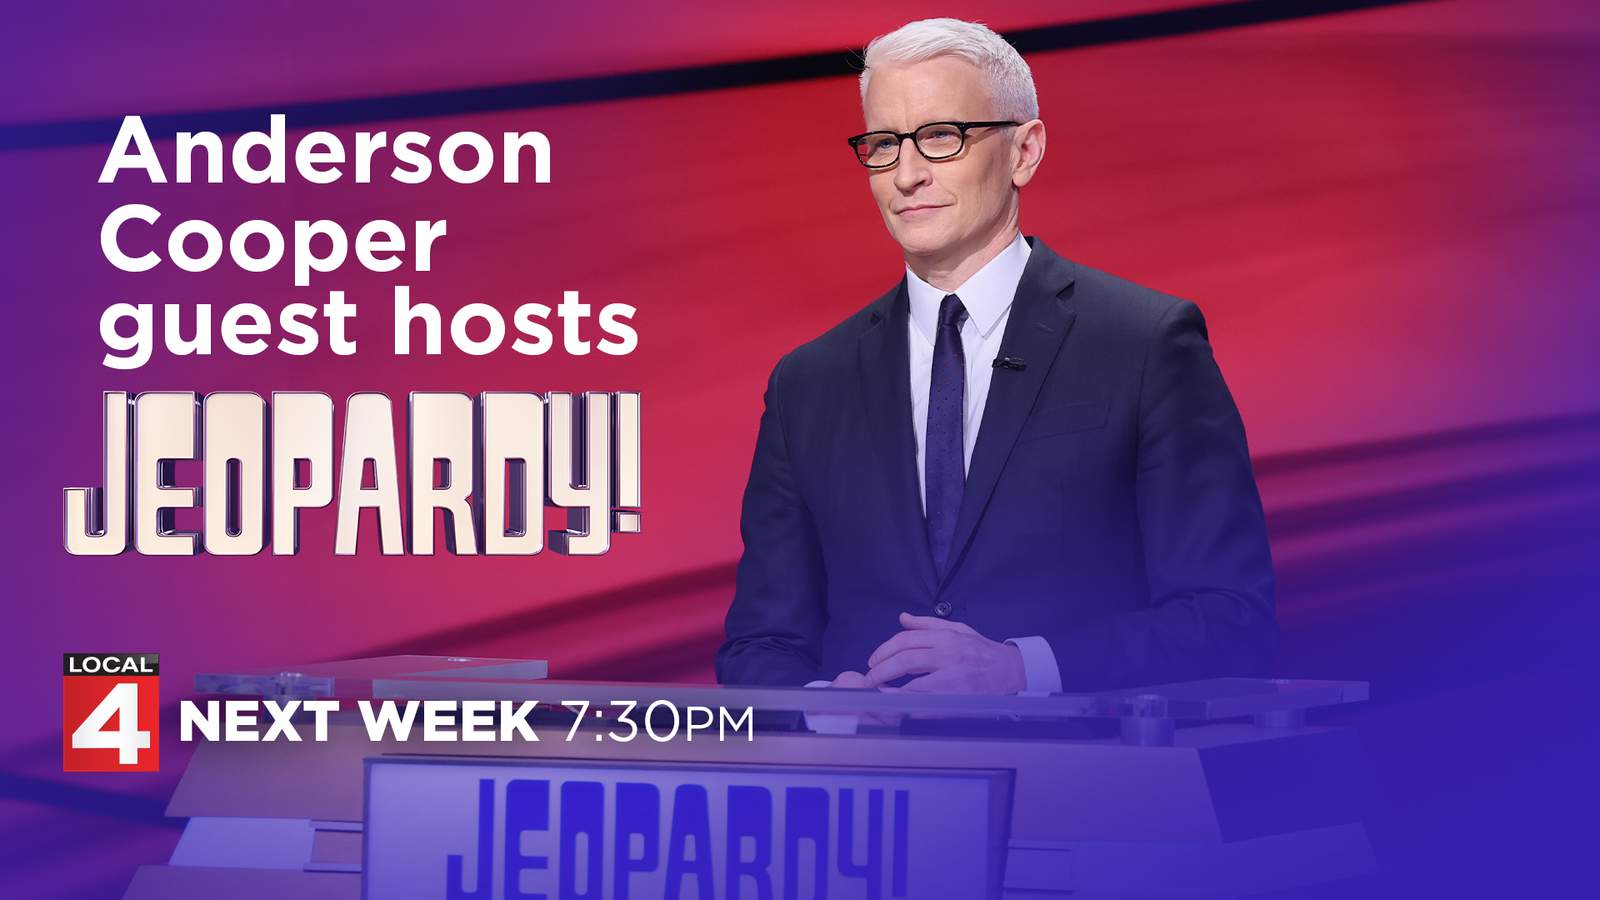 Watch Anderson Cooper talk about hosting ‘JEOPARDY!’